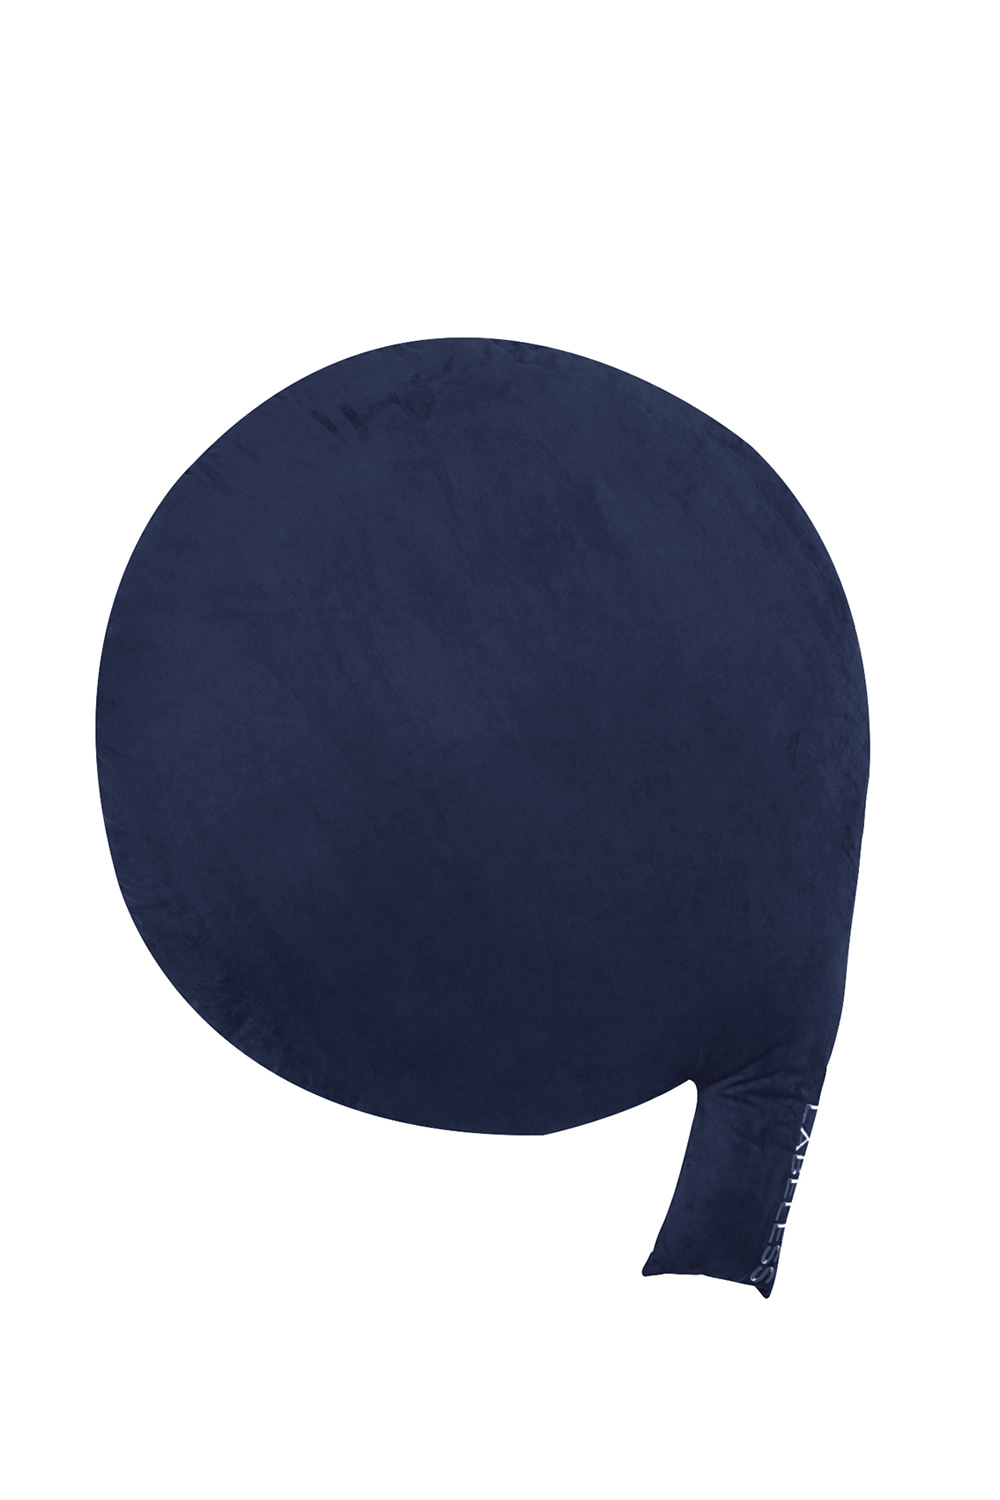 NAVY SUEDE COMMA CUSHION